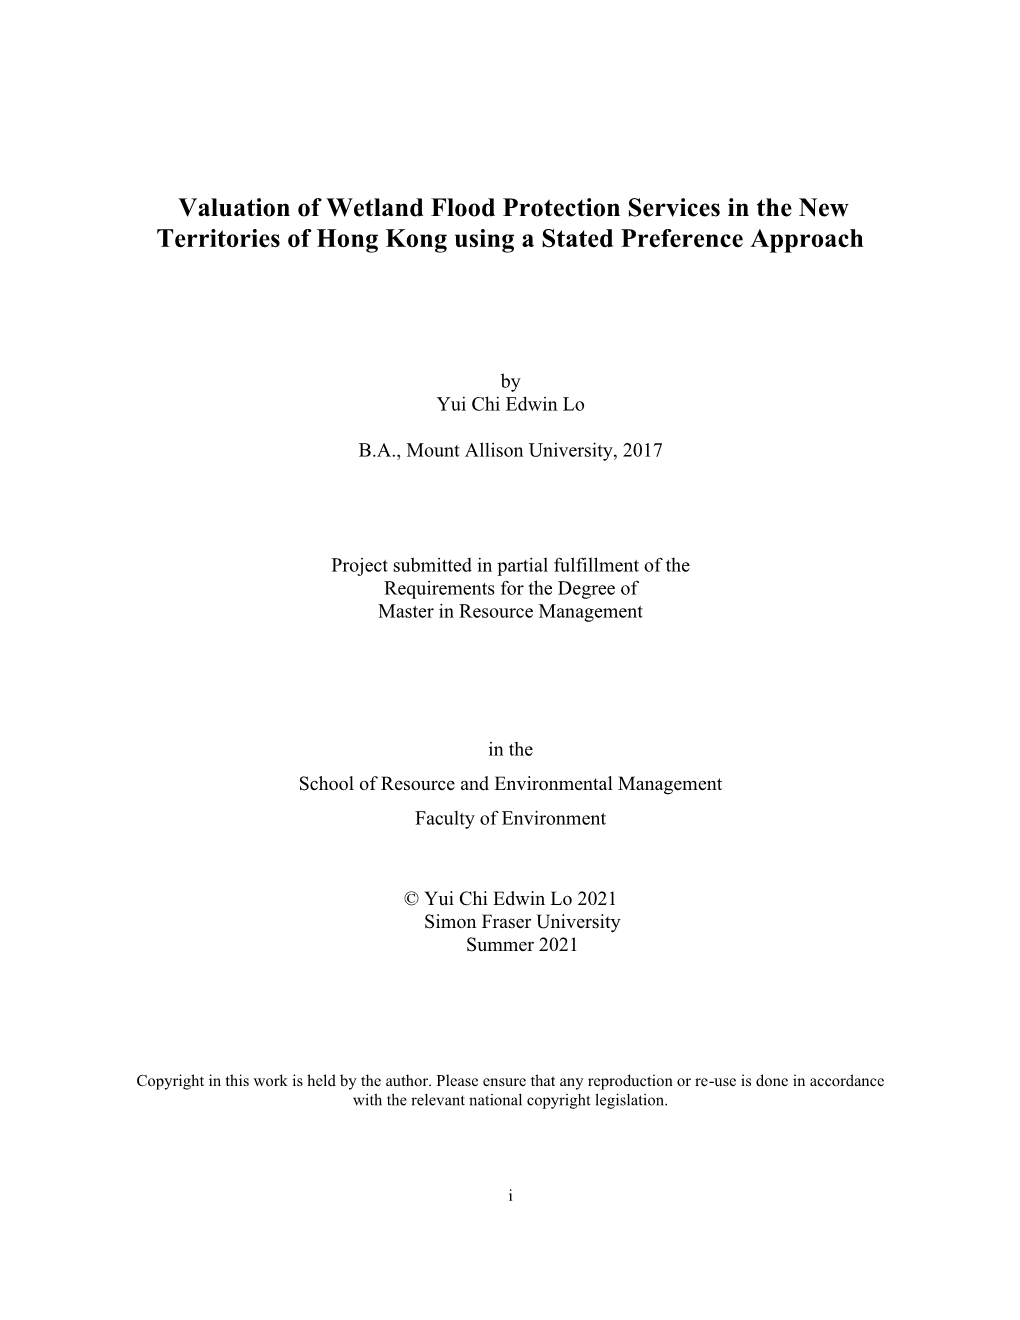 Valuation of Wetland Flood Protection Services in the New Territories of Hong Kong Using a Stated Preference Approach